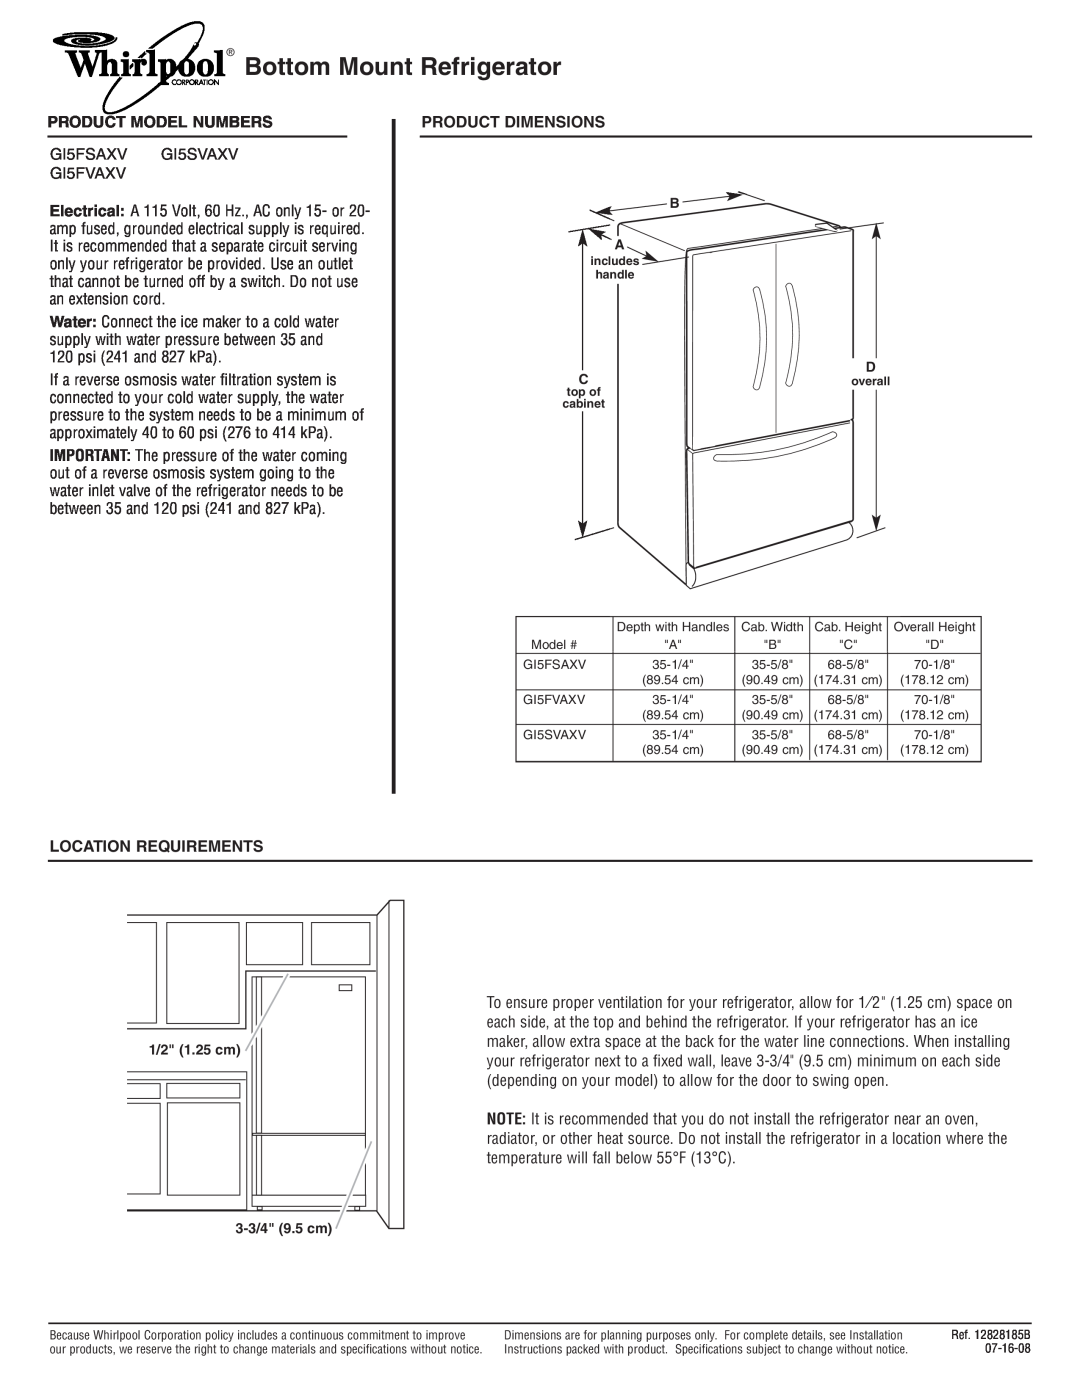 Whirlpool GI5SVAXV dimensions Bottom Mount Refrigerator, Product Model Numbers, Product Dimensions, Location Requirements 